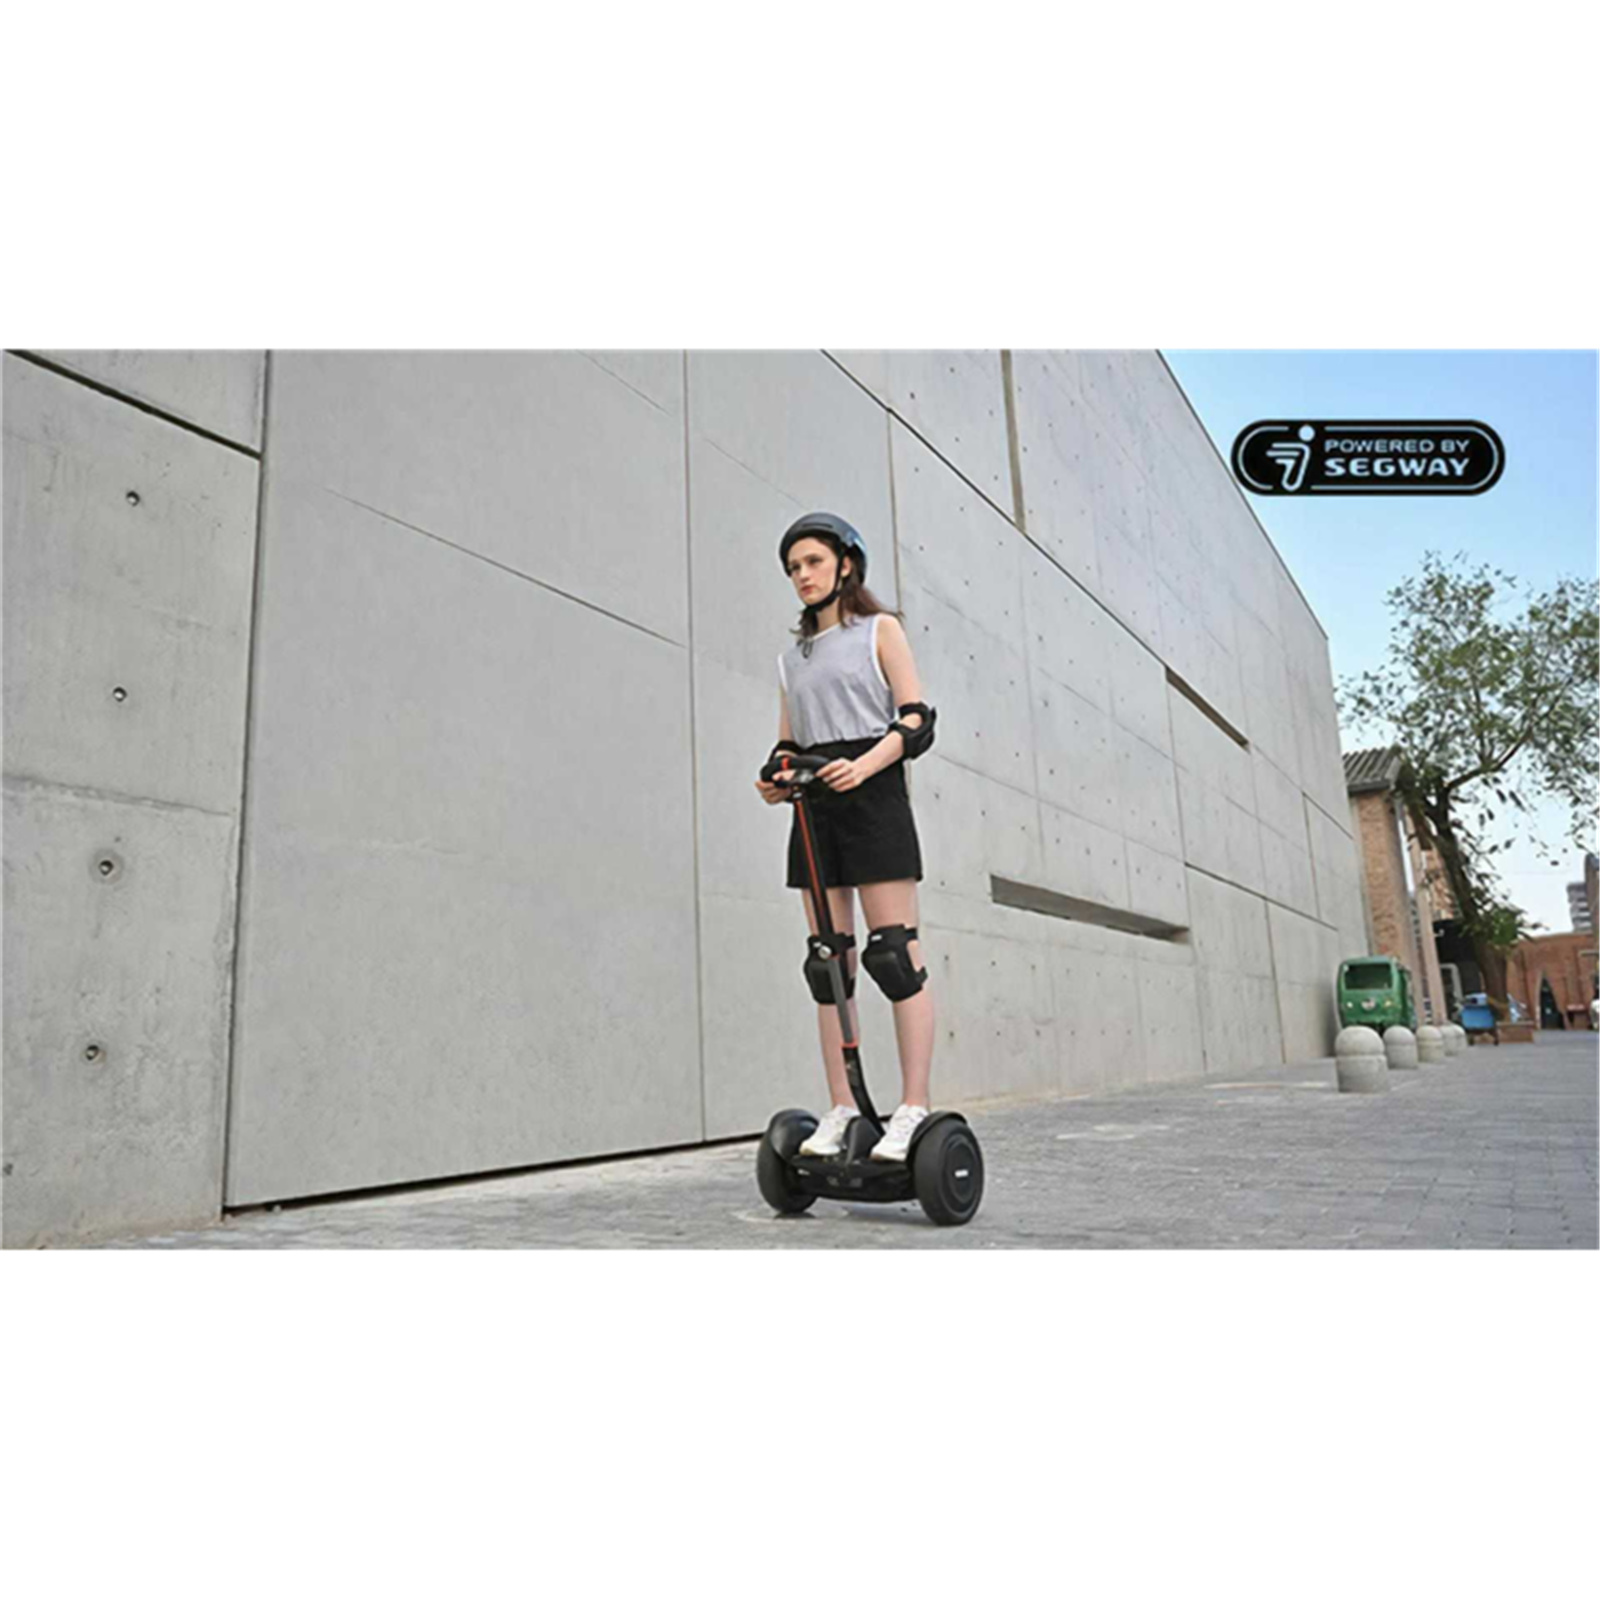 Buy the Segway Ninebot S Max Electric Balance Car Self-Balancing,  Steering ( AA.00.0011.17 ) online - /pacific